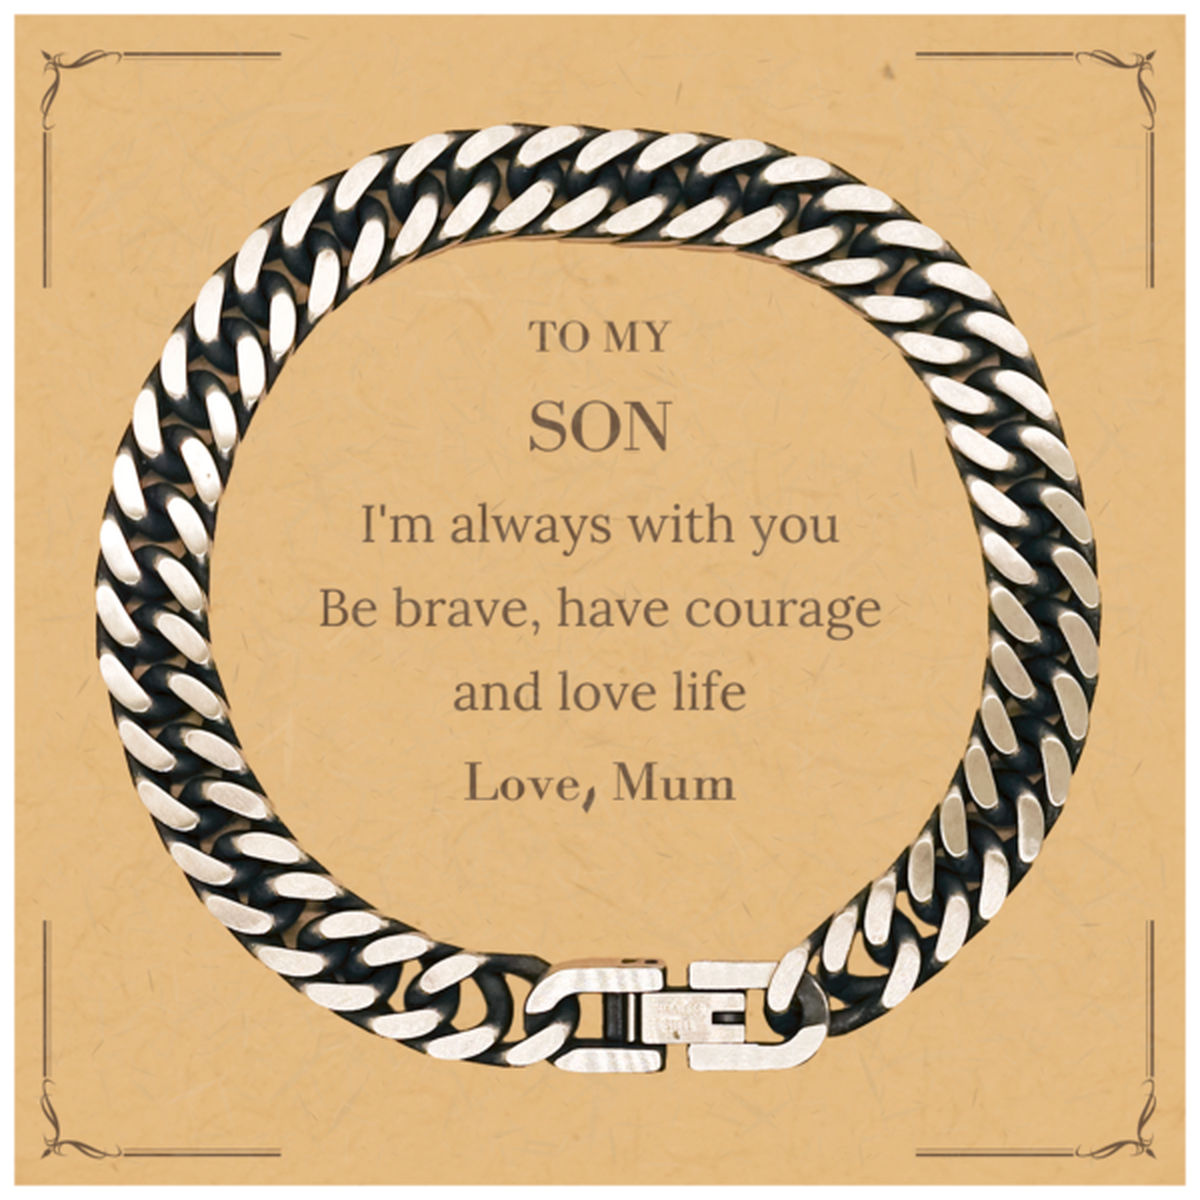 To My Son Gifts from Mum, Unique Cuban Link Chain Bracelet Inspirational Christmas Birthday Graduation Gifts for Son I'm always with you. Be brave, have courage and love life. Love, Mum